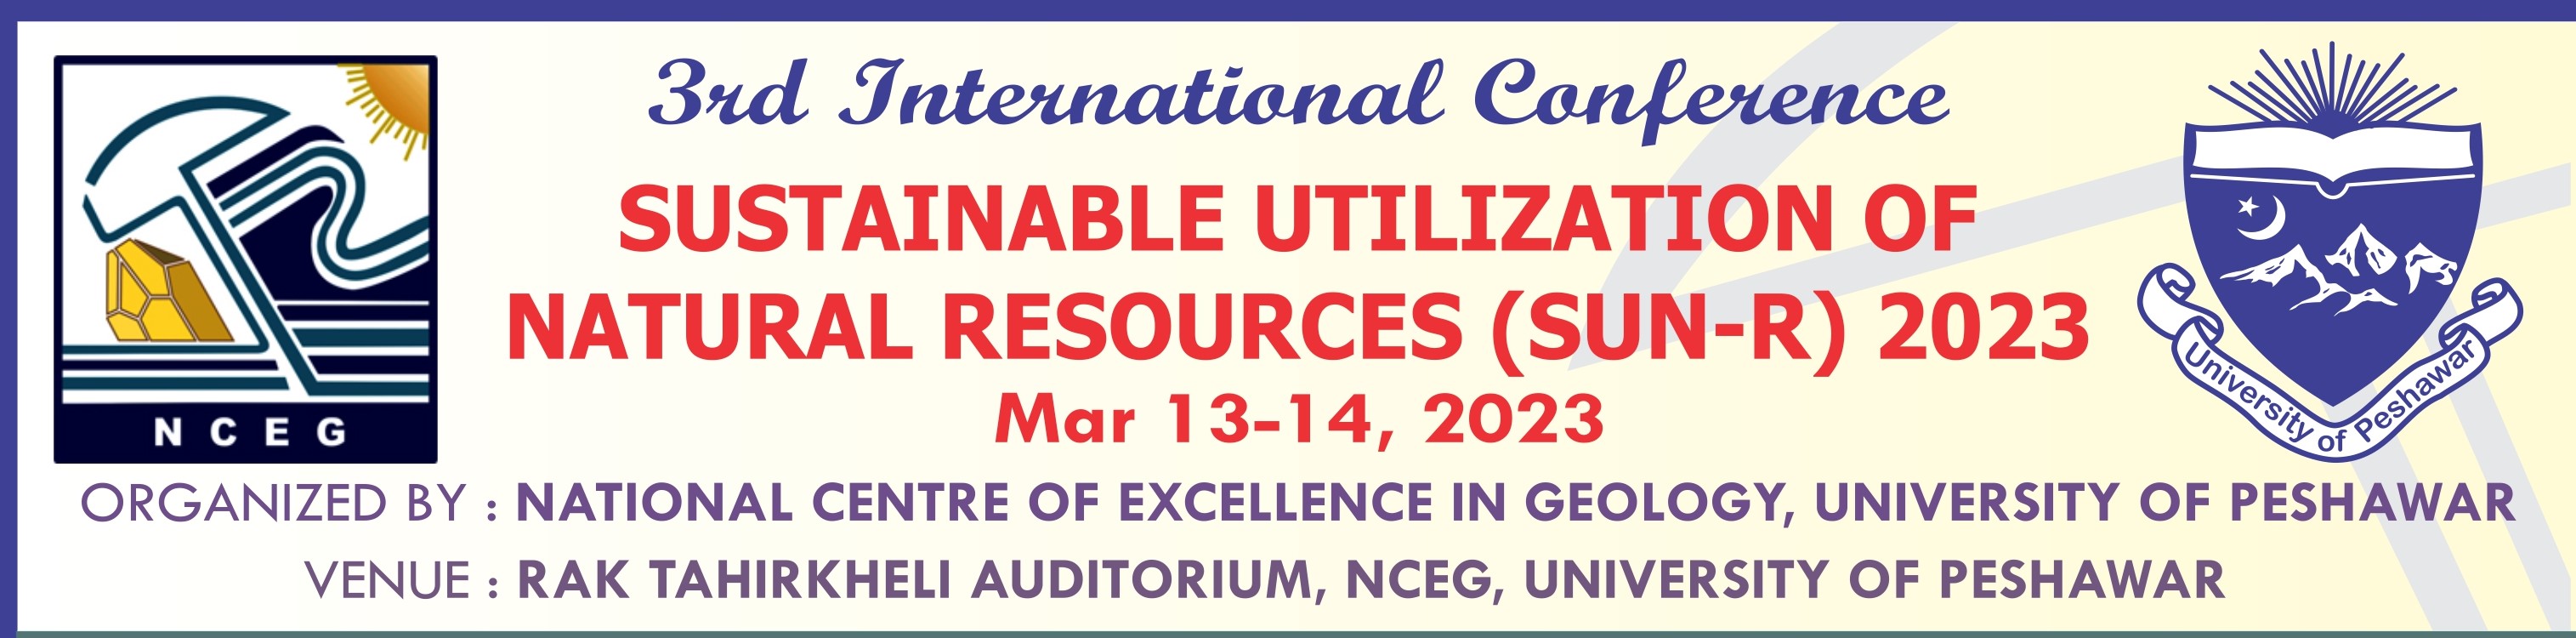 3rd International Conference Sustainable Utilization of Natural Resources (SUN-R)